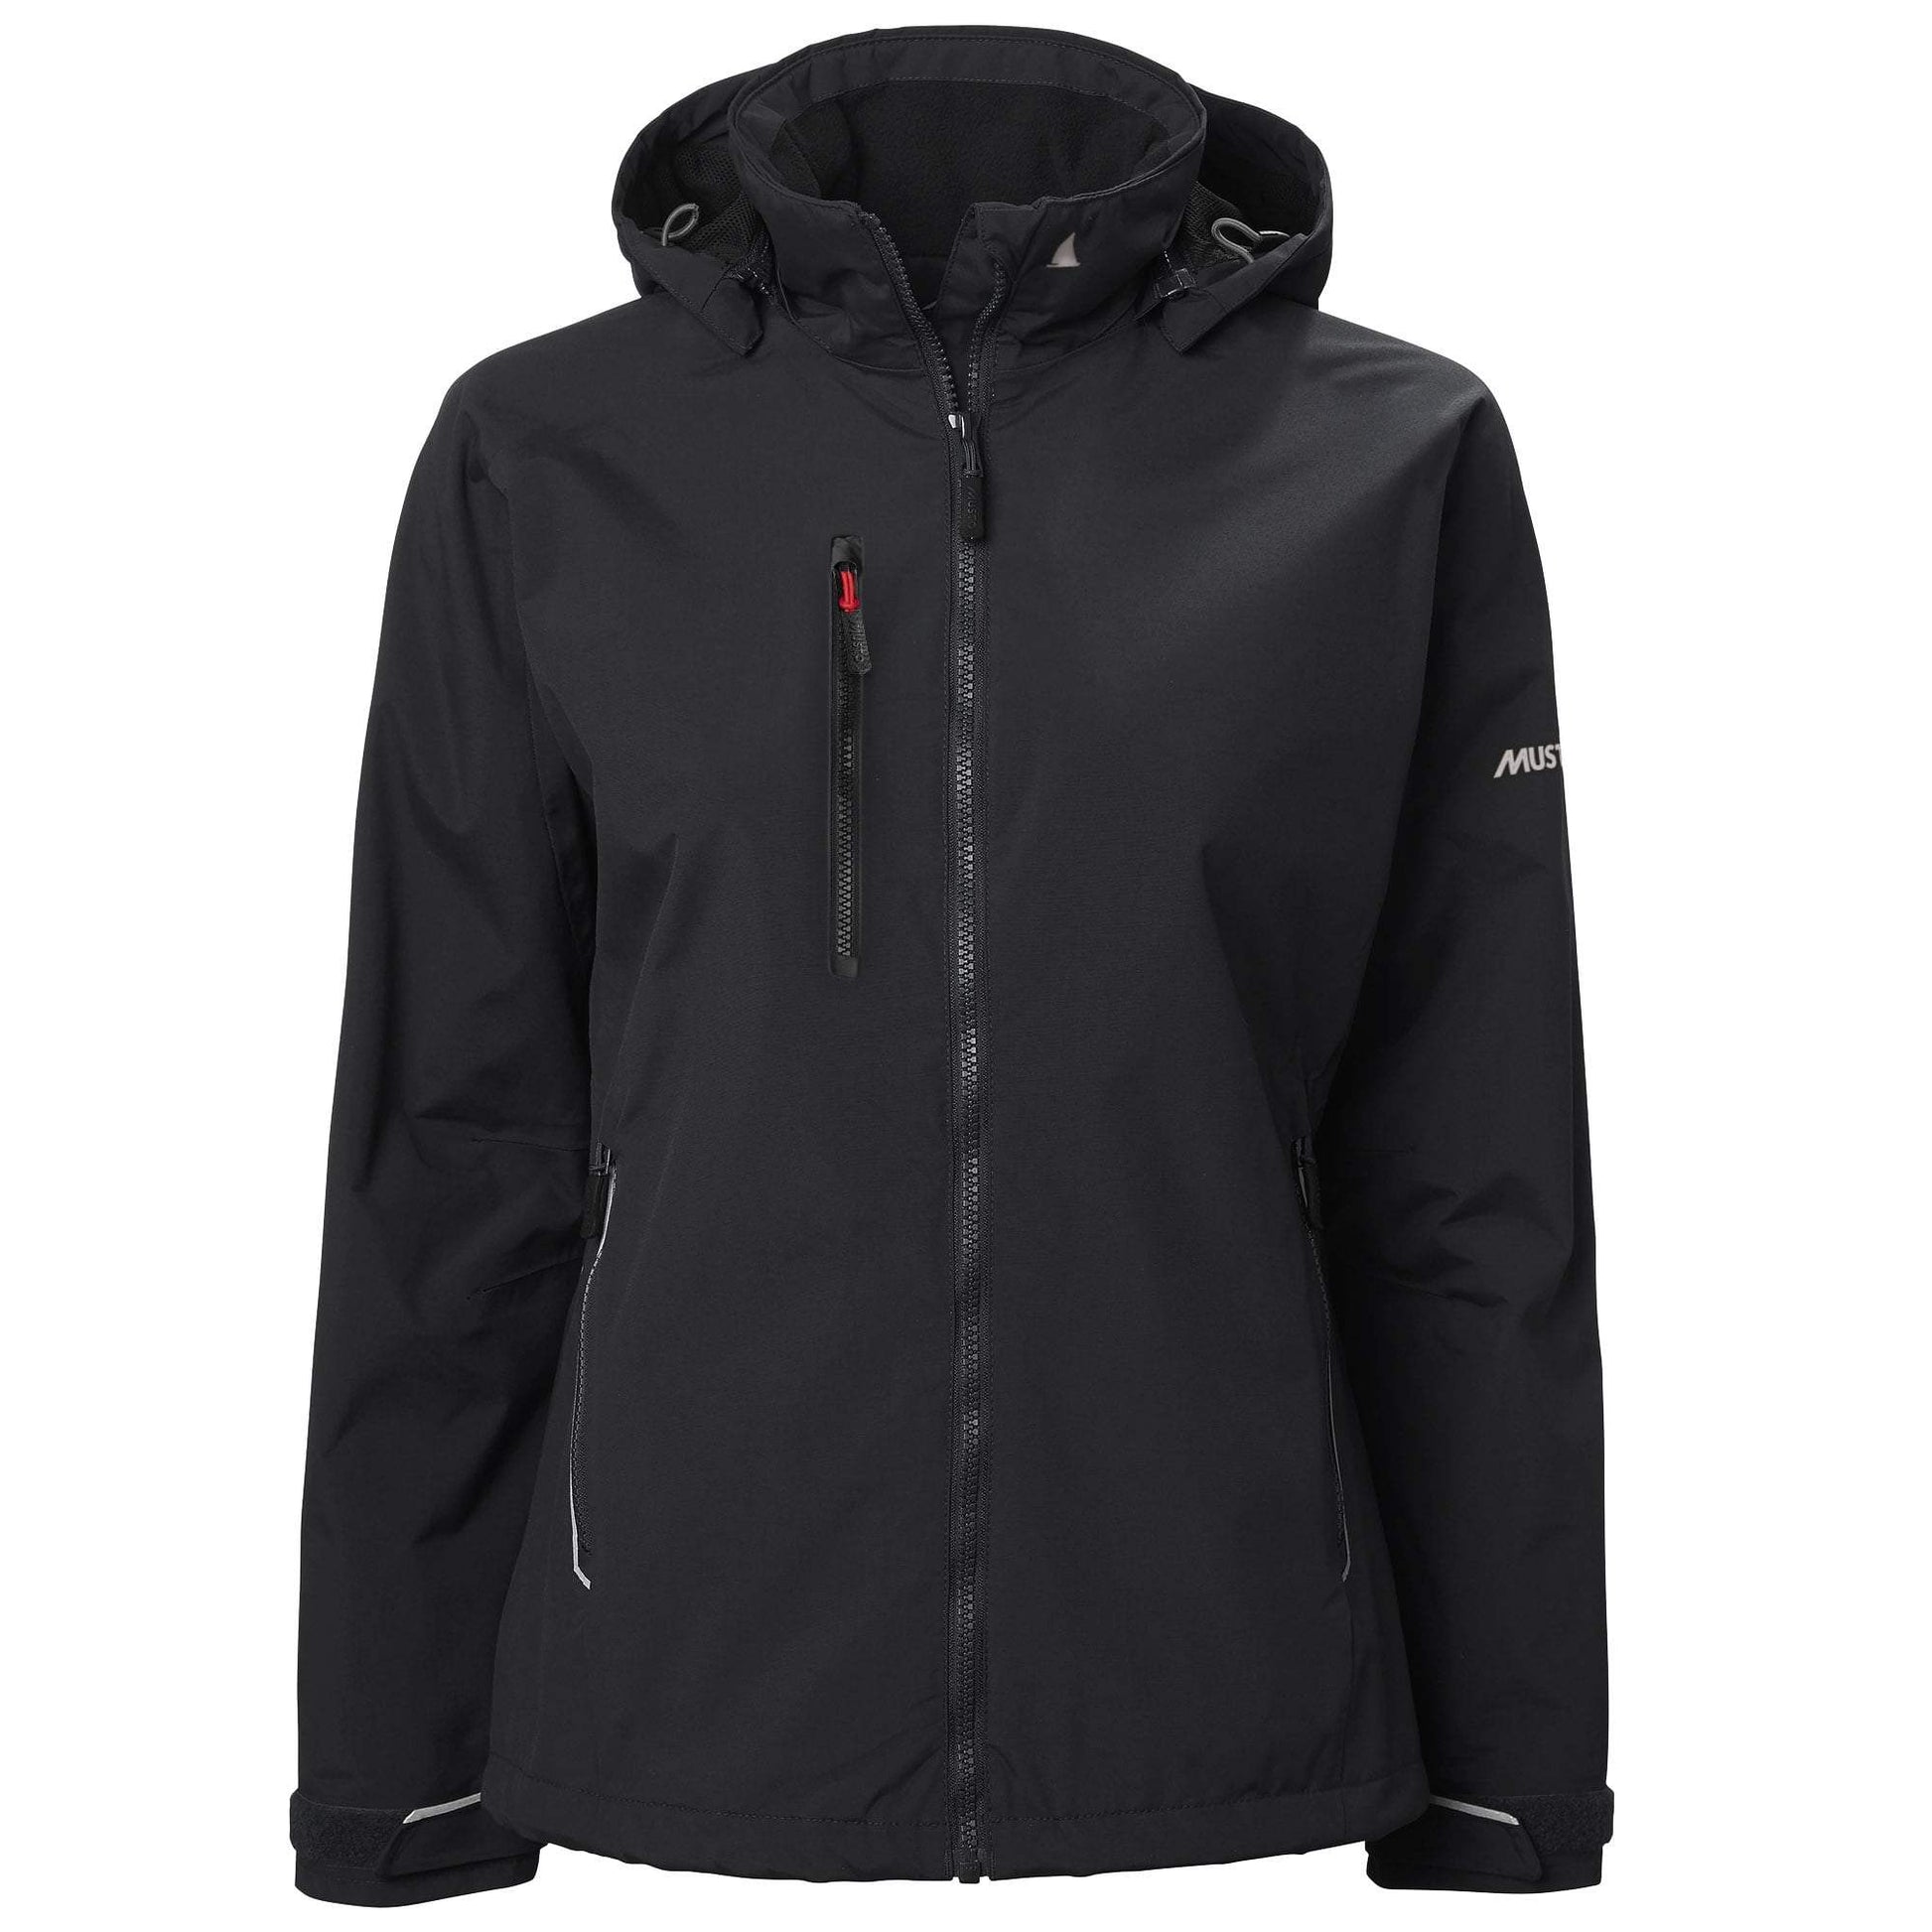 Women’s Corsica Jkt 2.0 by Musto - The Luxury Promotional Gifts Company Limited